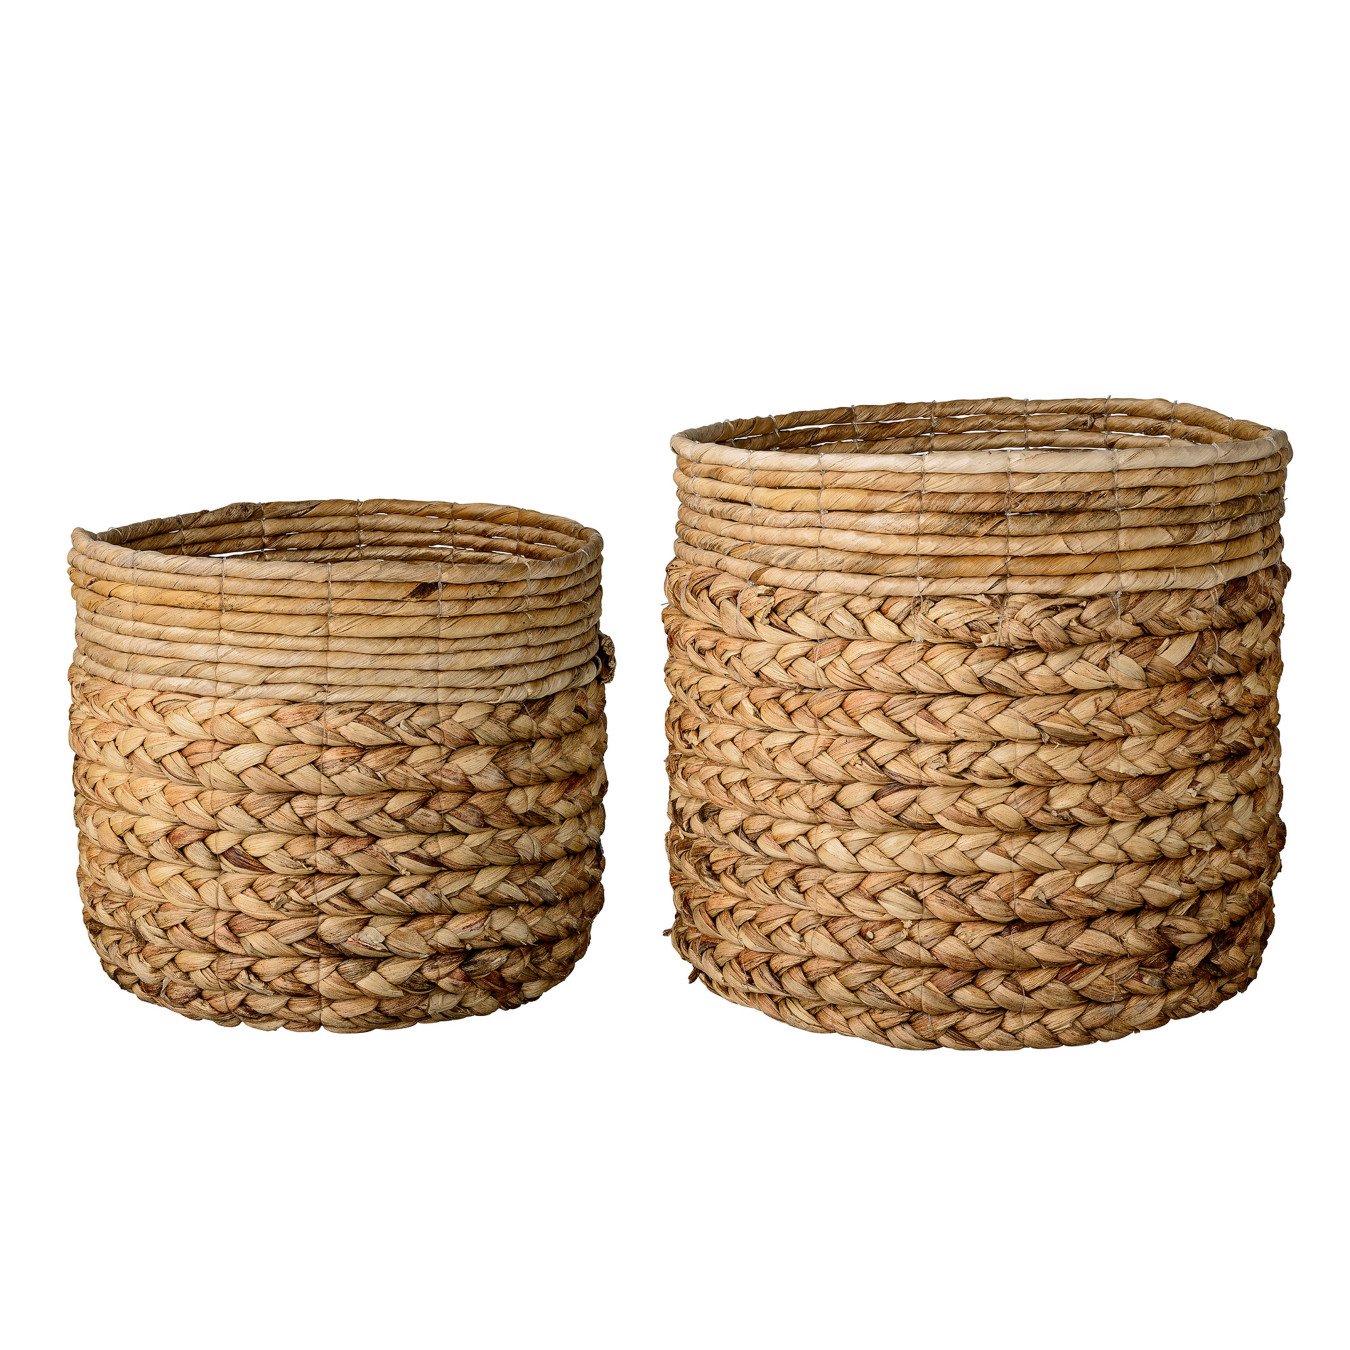 Beige Water Hyacinth and Banana Leaf Baskets (Set of 2 Sizes)